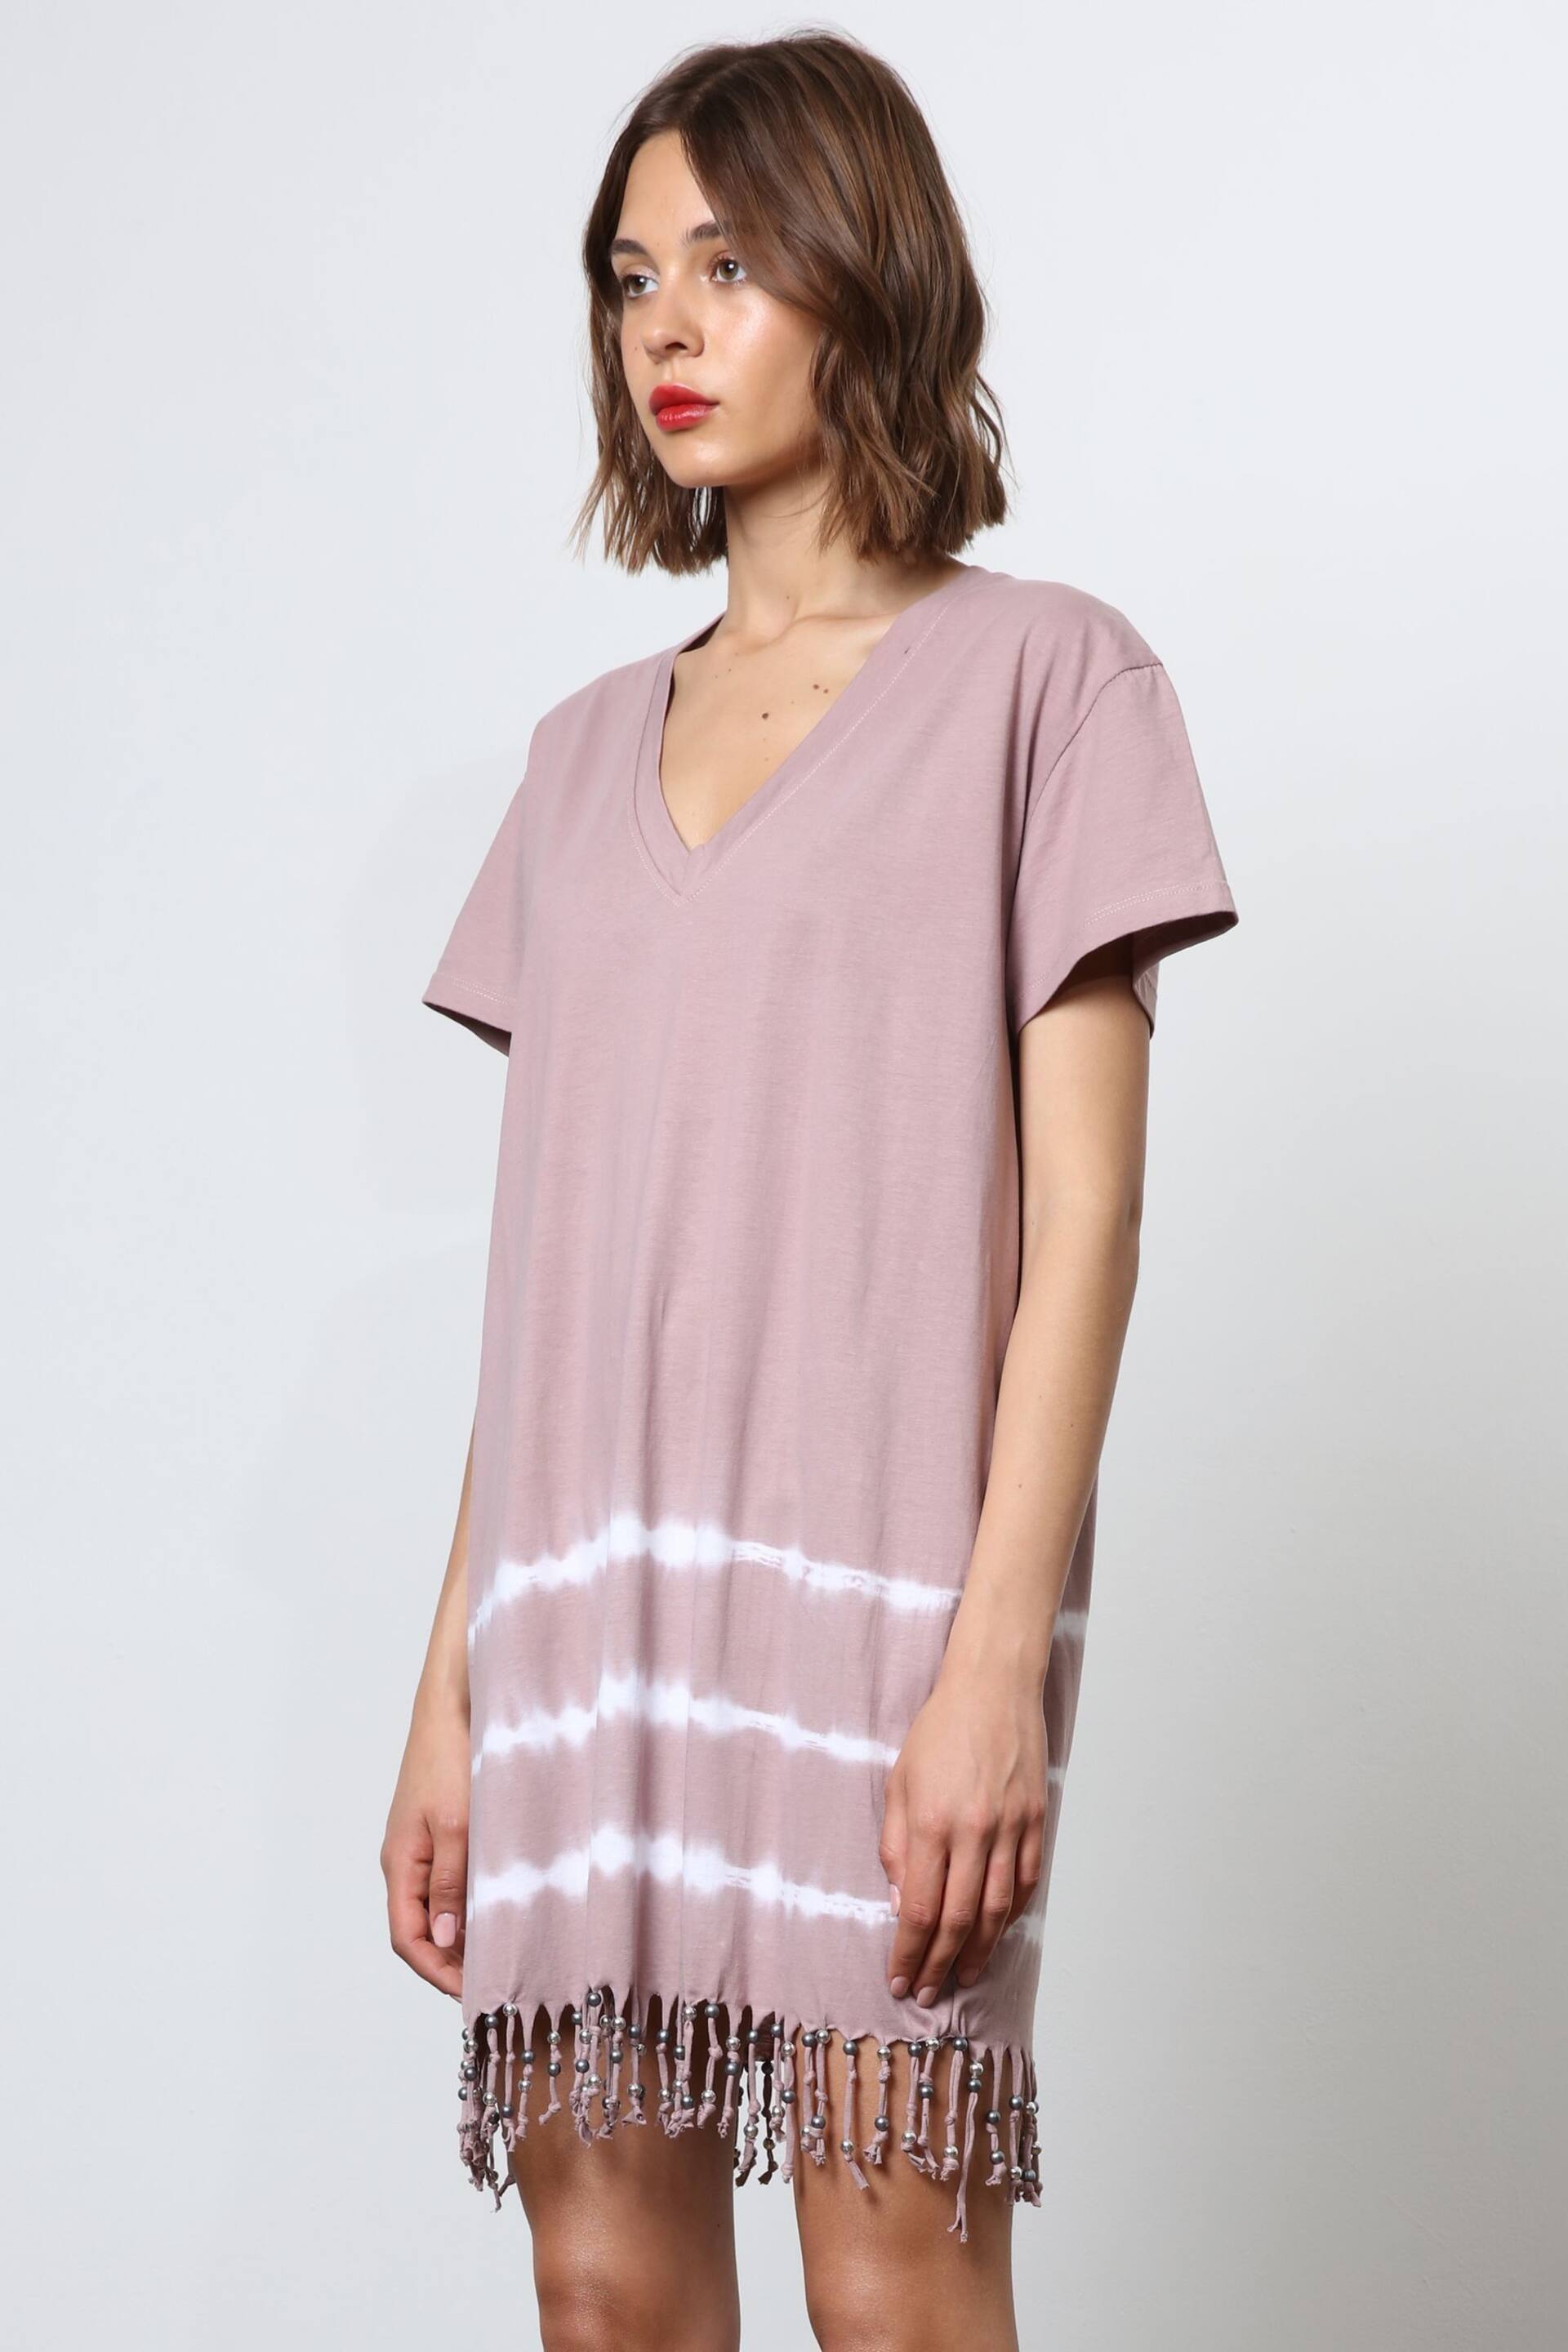 Religion Nude Particle Mini Tunic Dress With Tie Dye and Tassles - Image 5 of 6